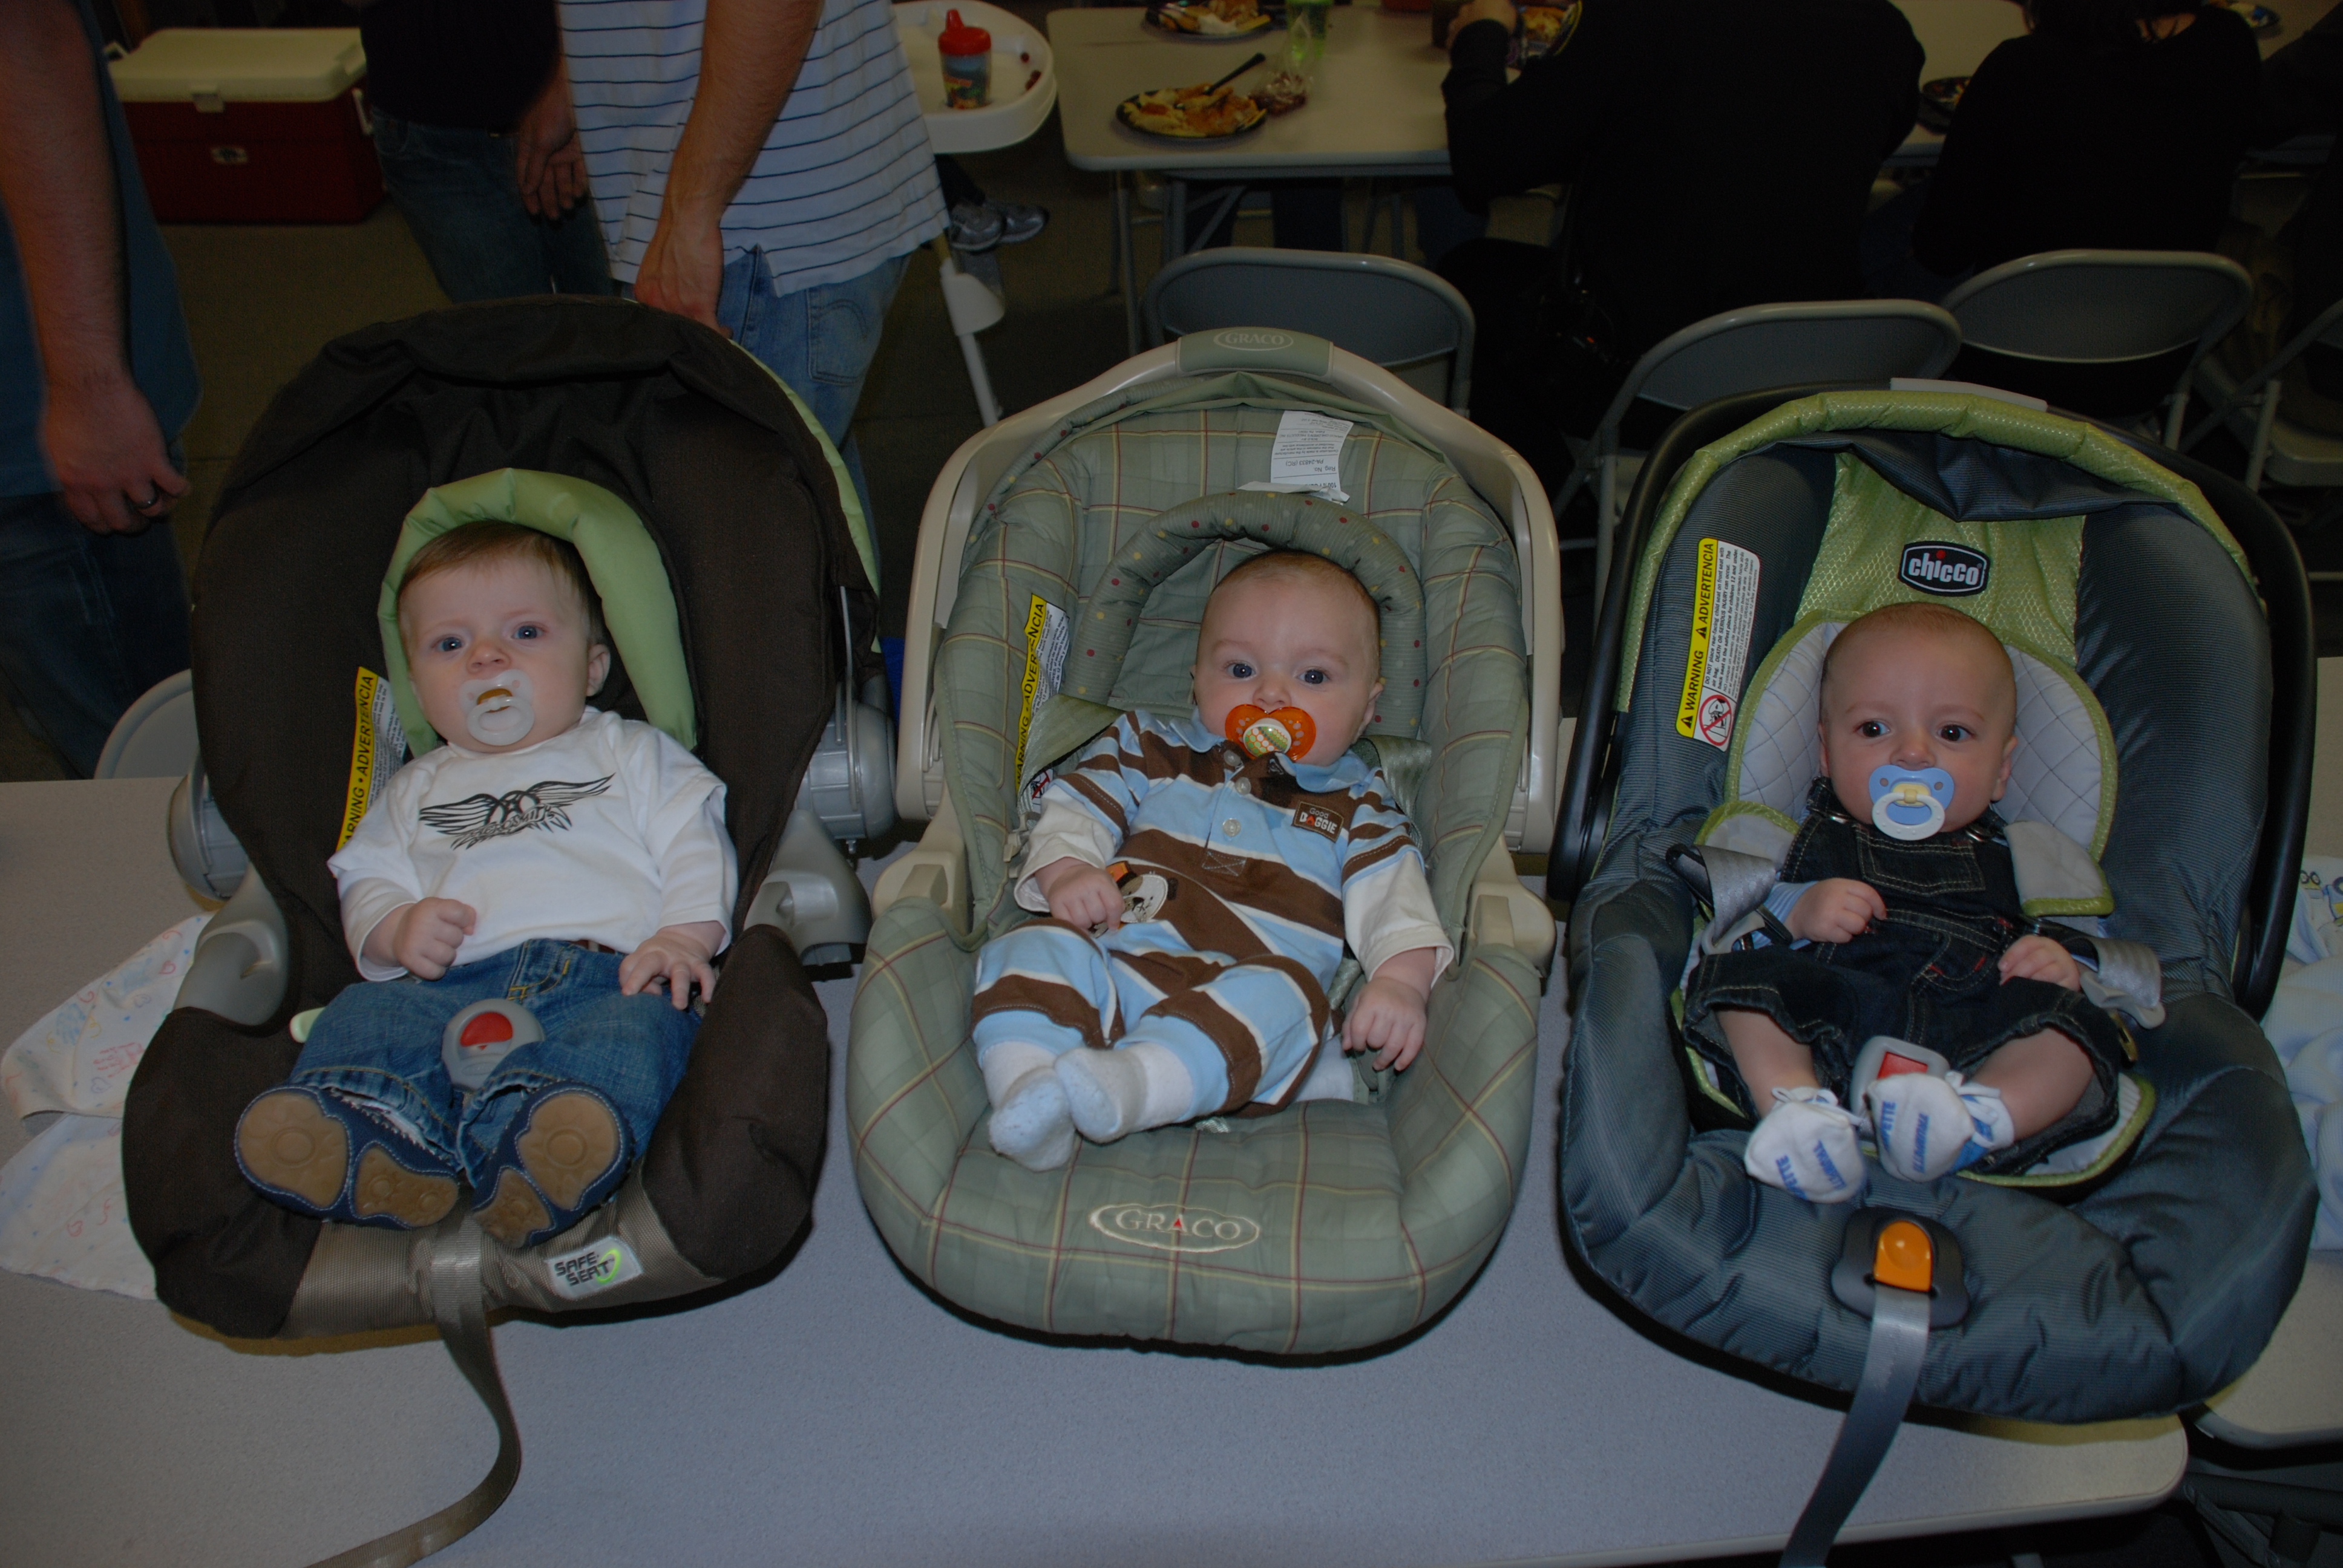 Carter, Miles, and Owen were all born within about 3 weeks of each other.